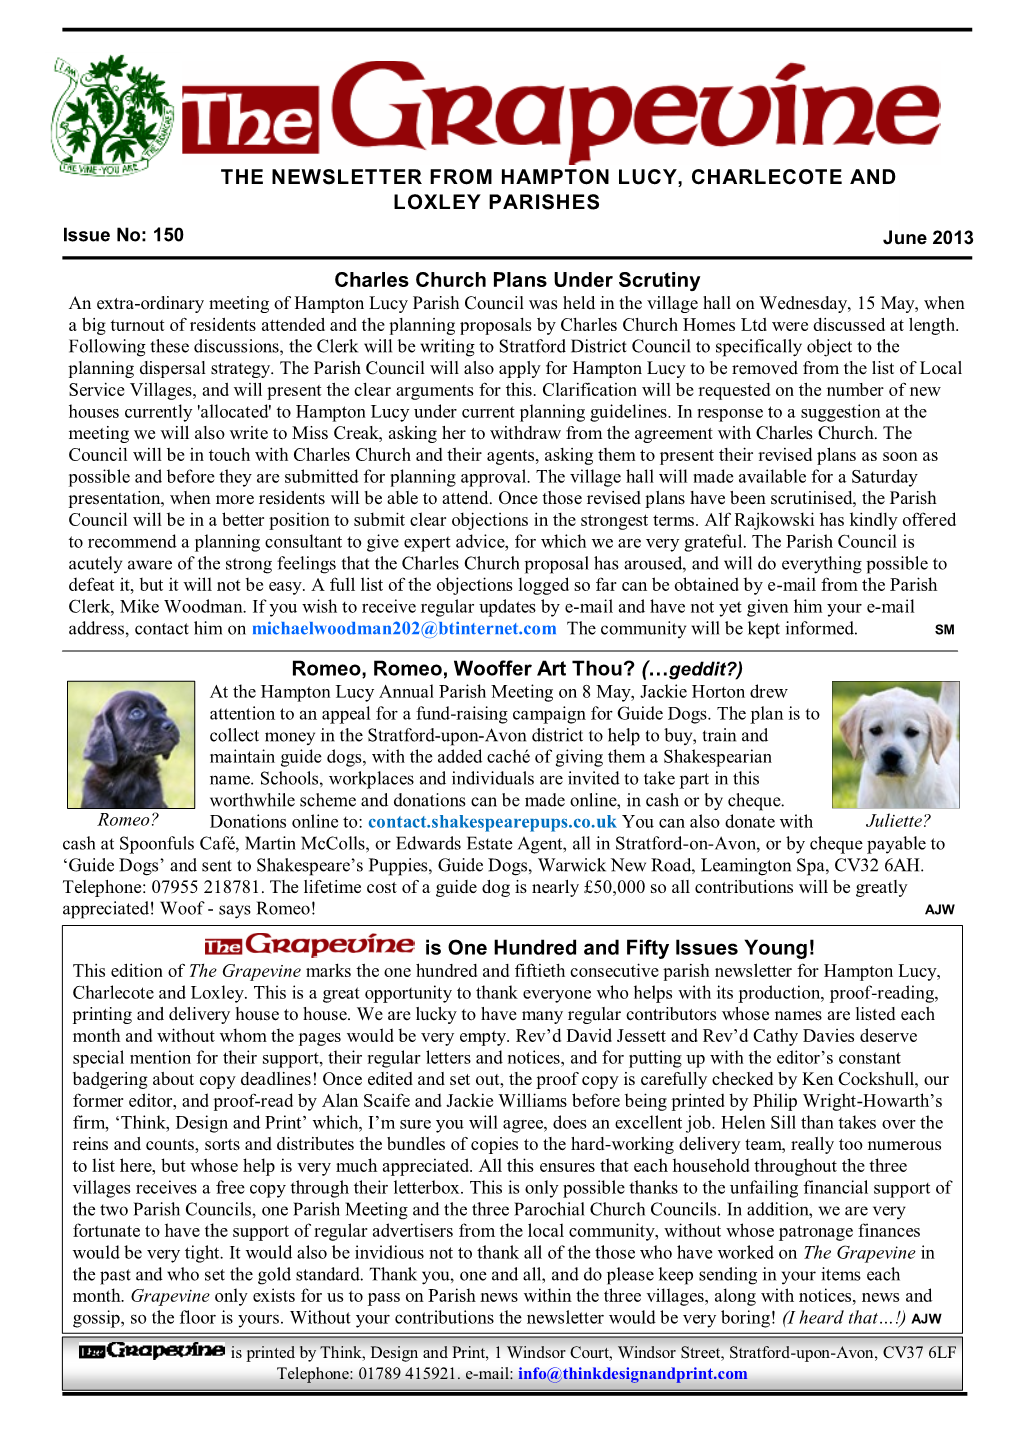 THE NEWSLETTER from HAMPTON LUCY, CHARLECOTE and LOXLEY PARISHES Issue No: 150 June 2013